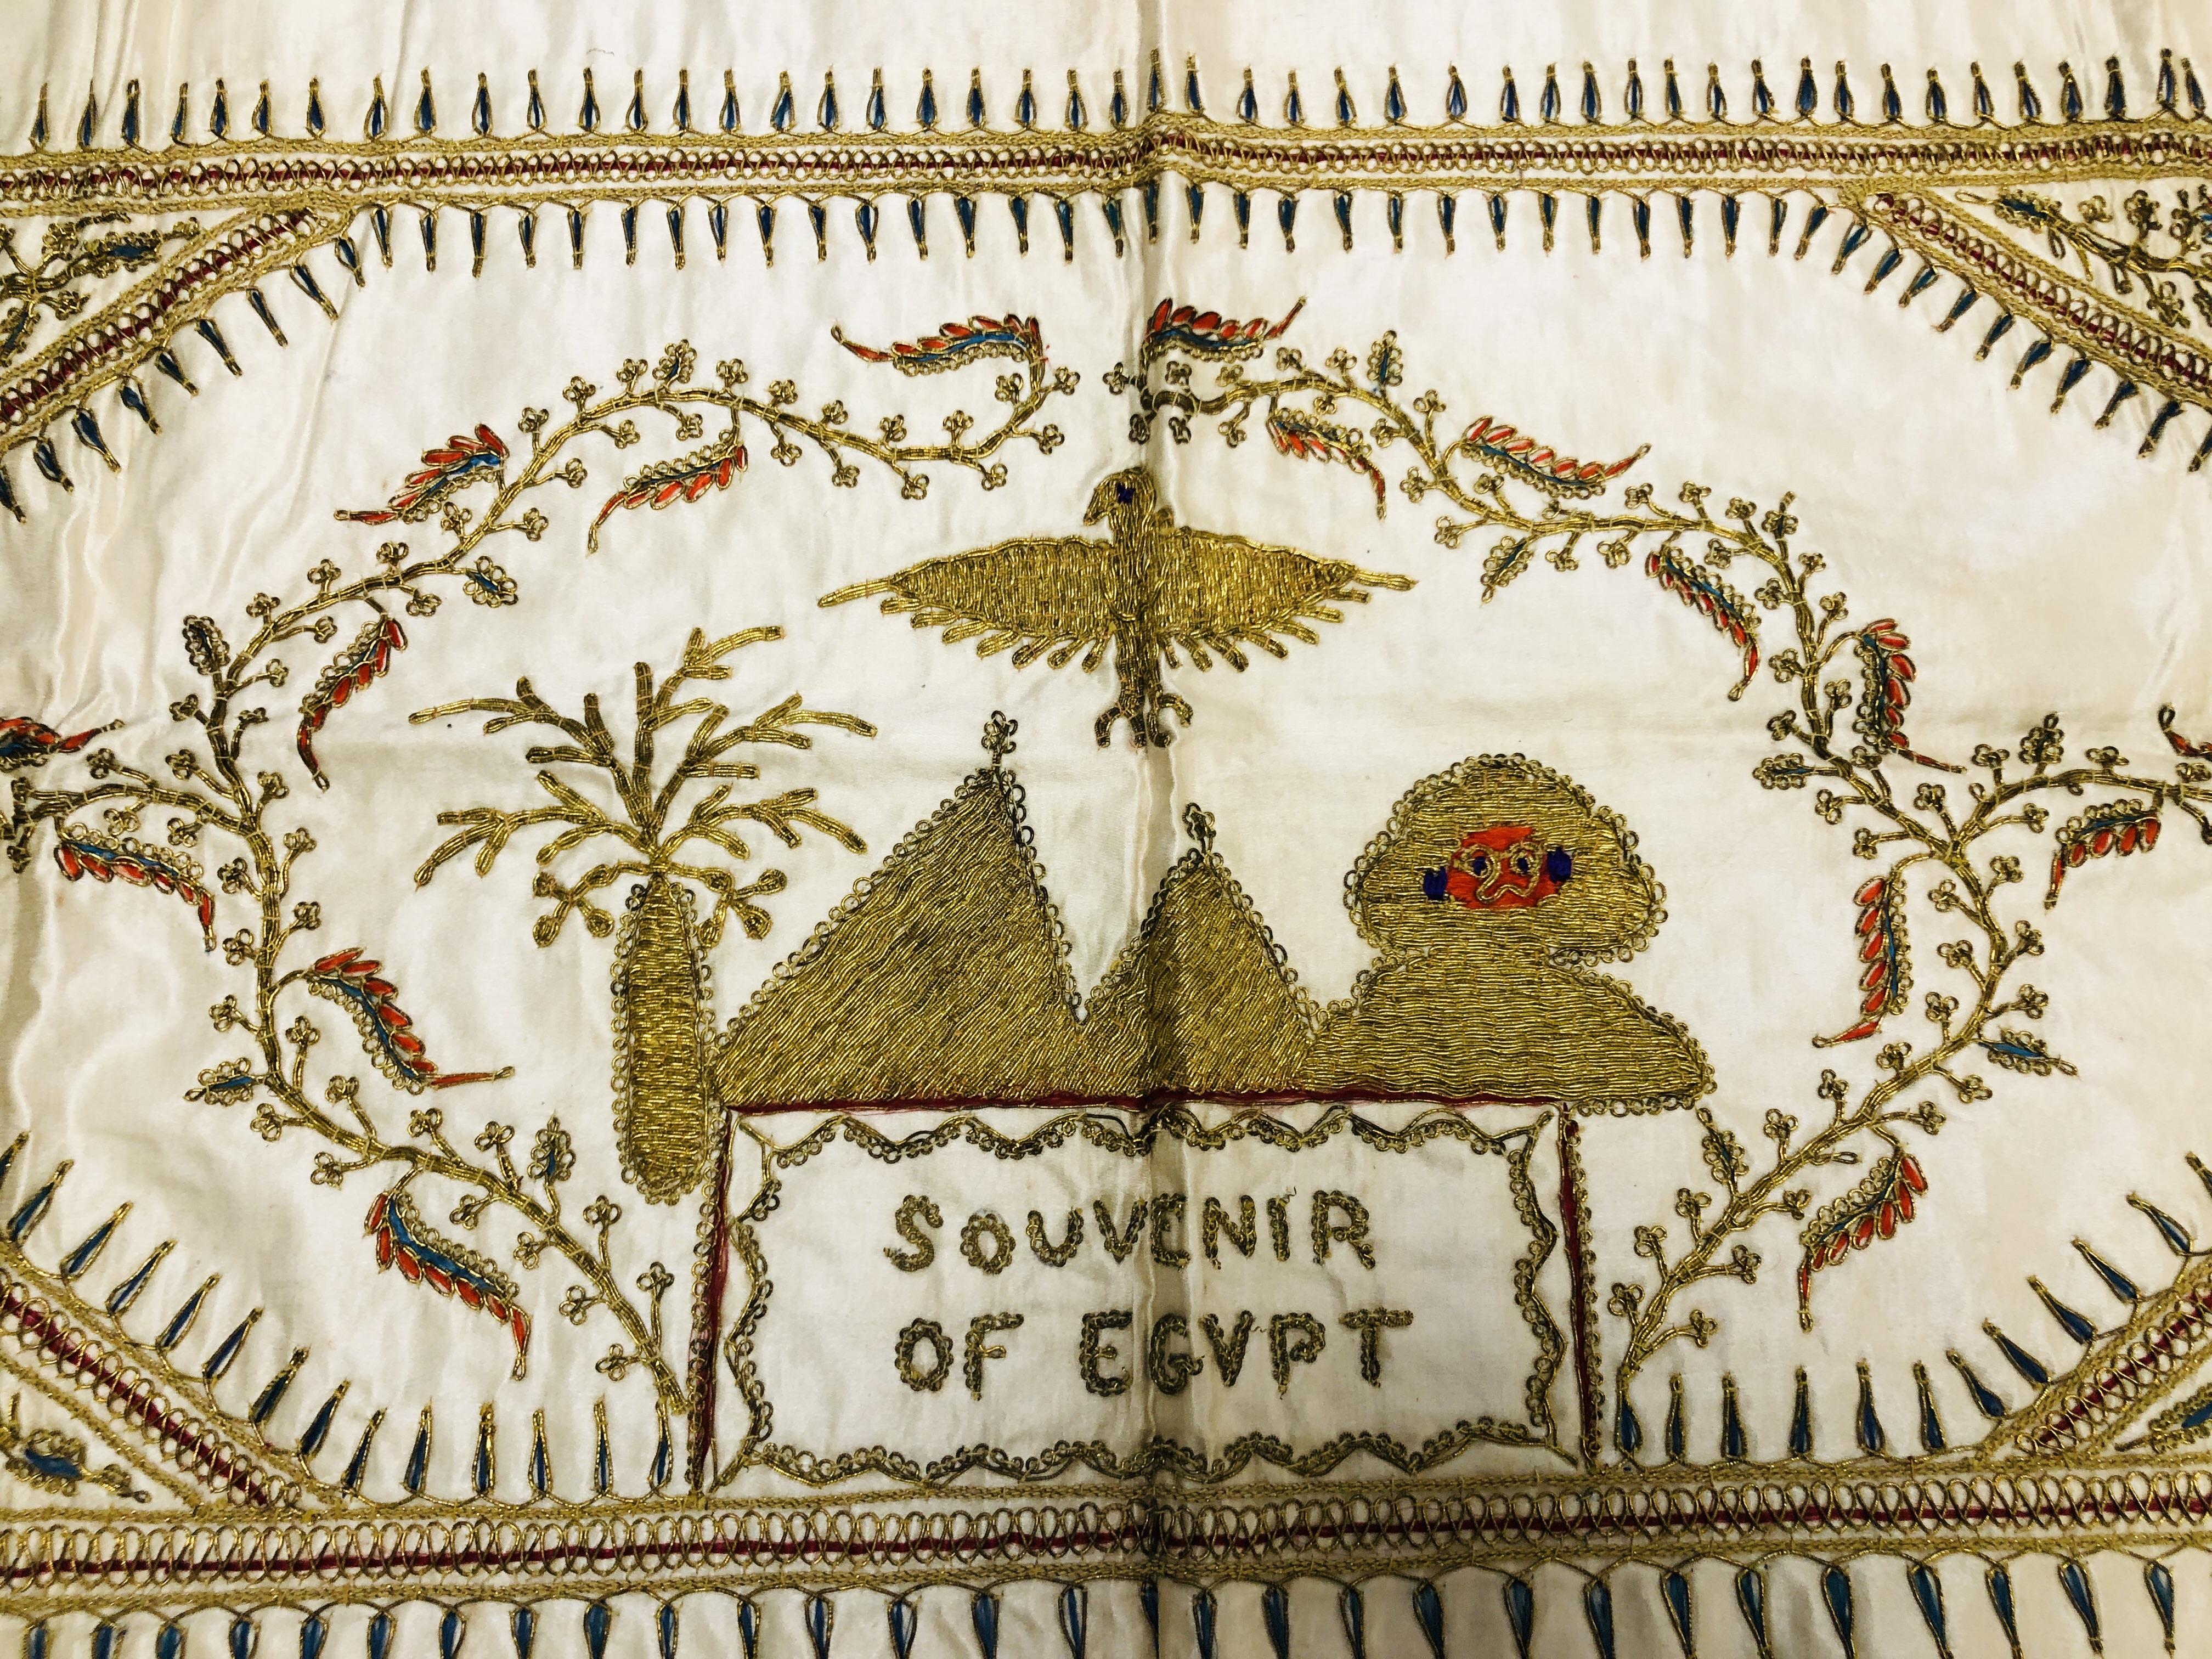 TWO SOUVENIR NEEDLEWORK PANELS, RELATING TO EGYPT, ONE INSCRIBED "ROYAL ORDNANCE...1942". - Image 7 of 9